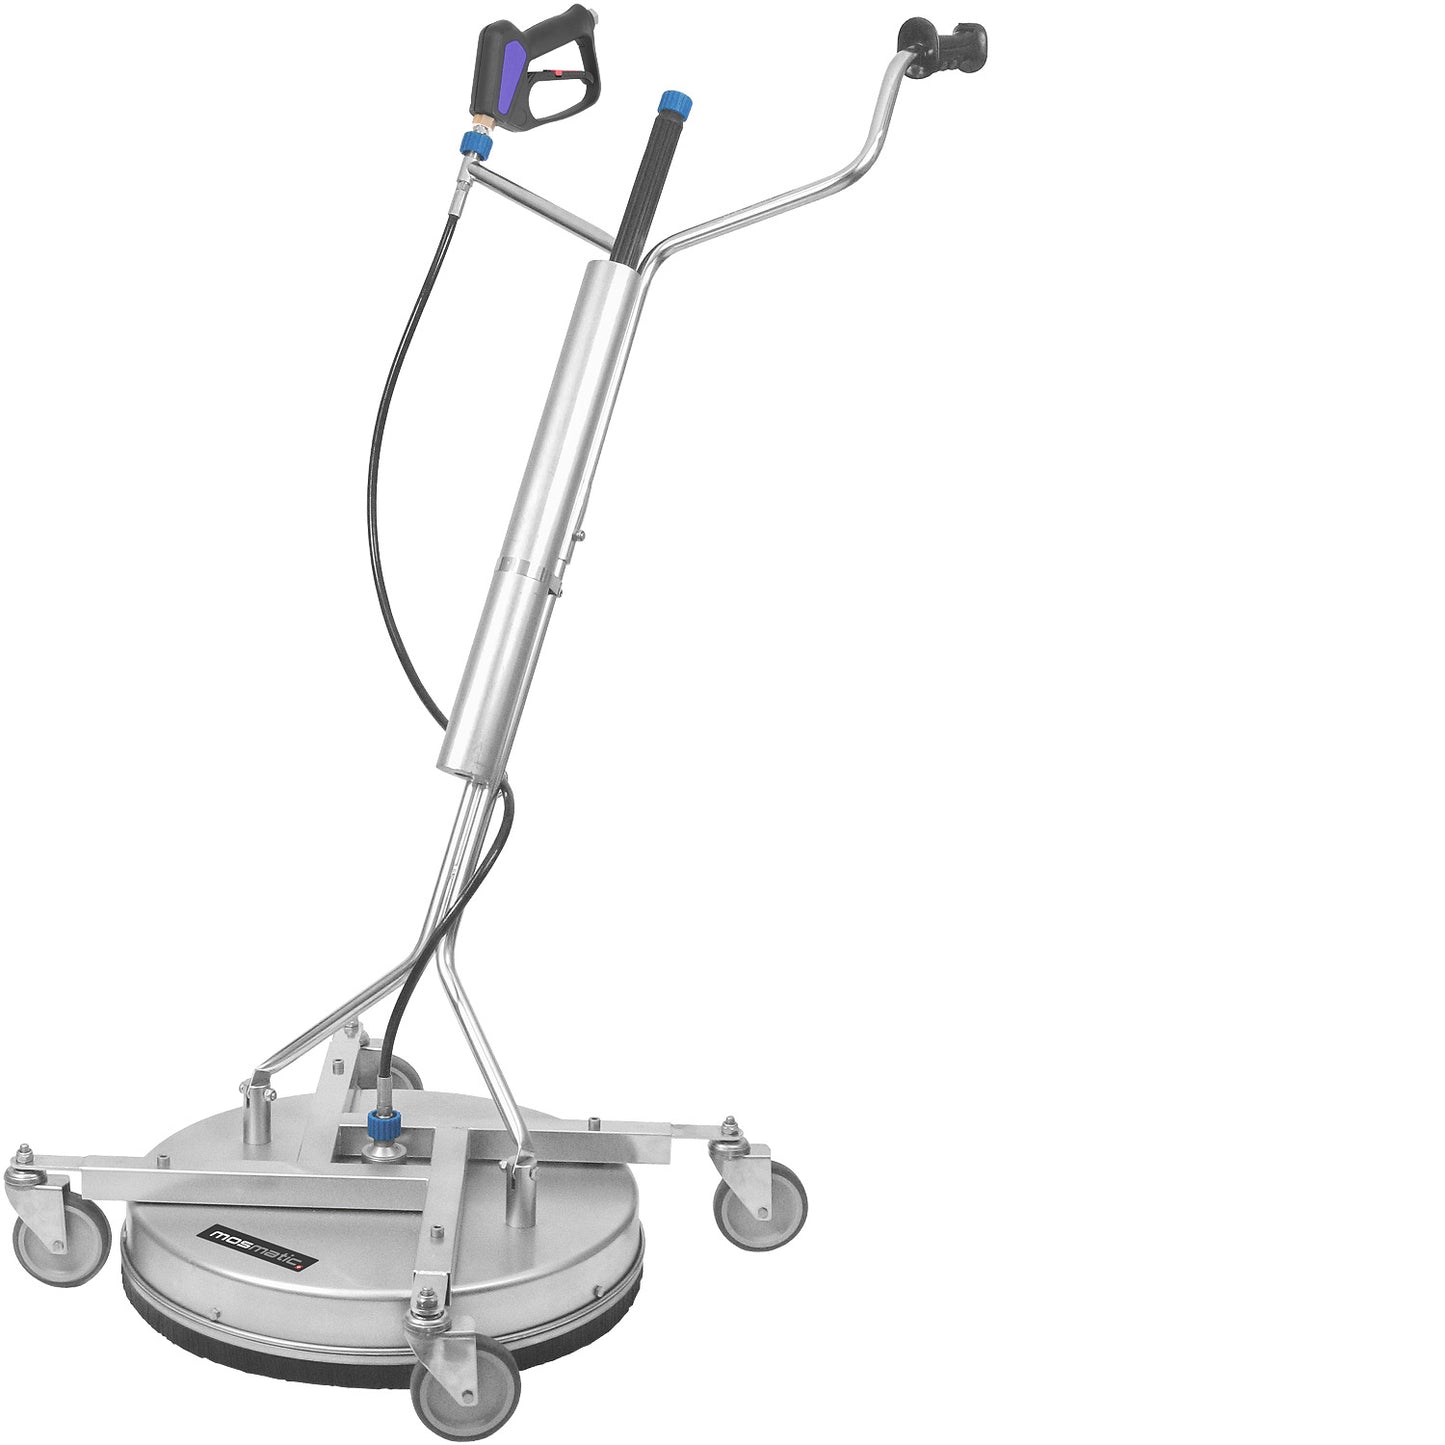 Mosmatic Contractor Surface Cleaner